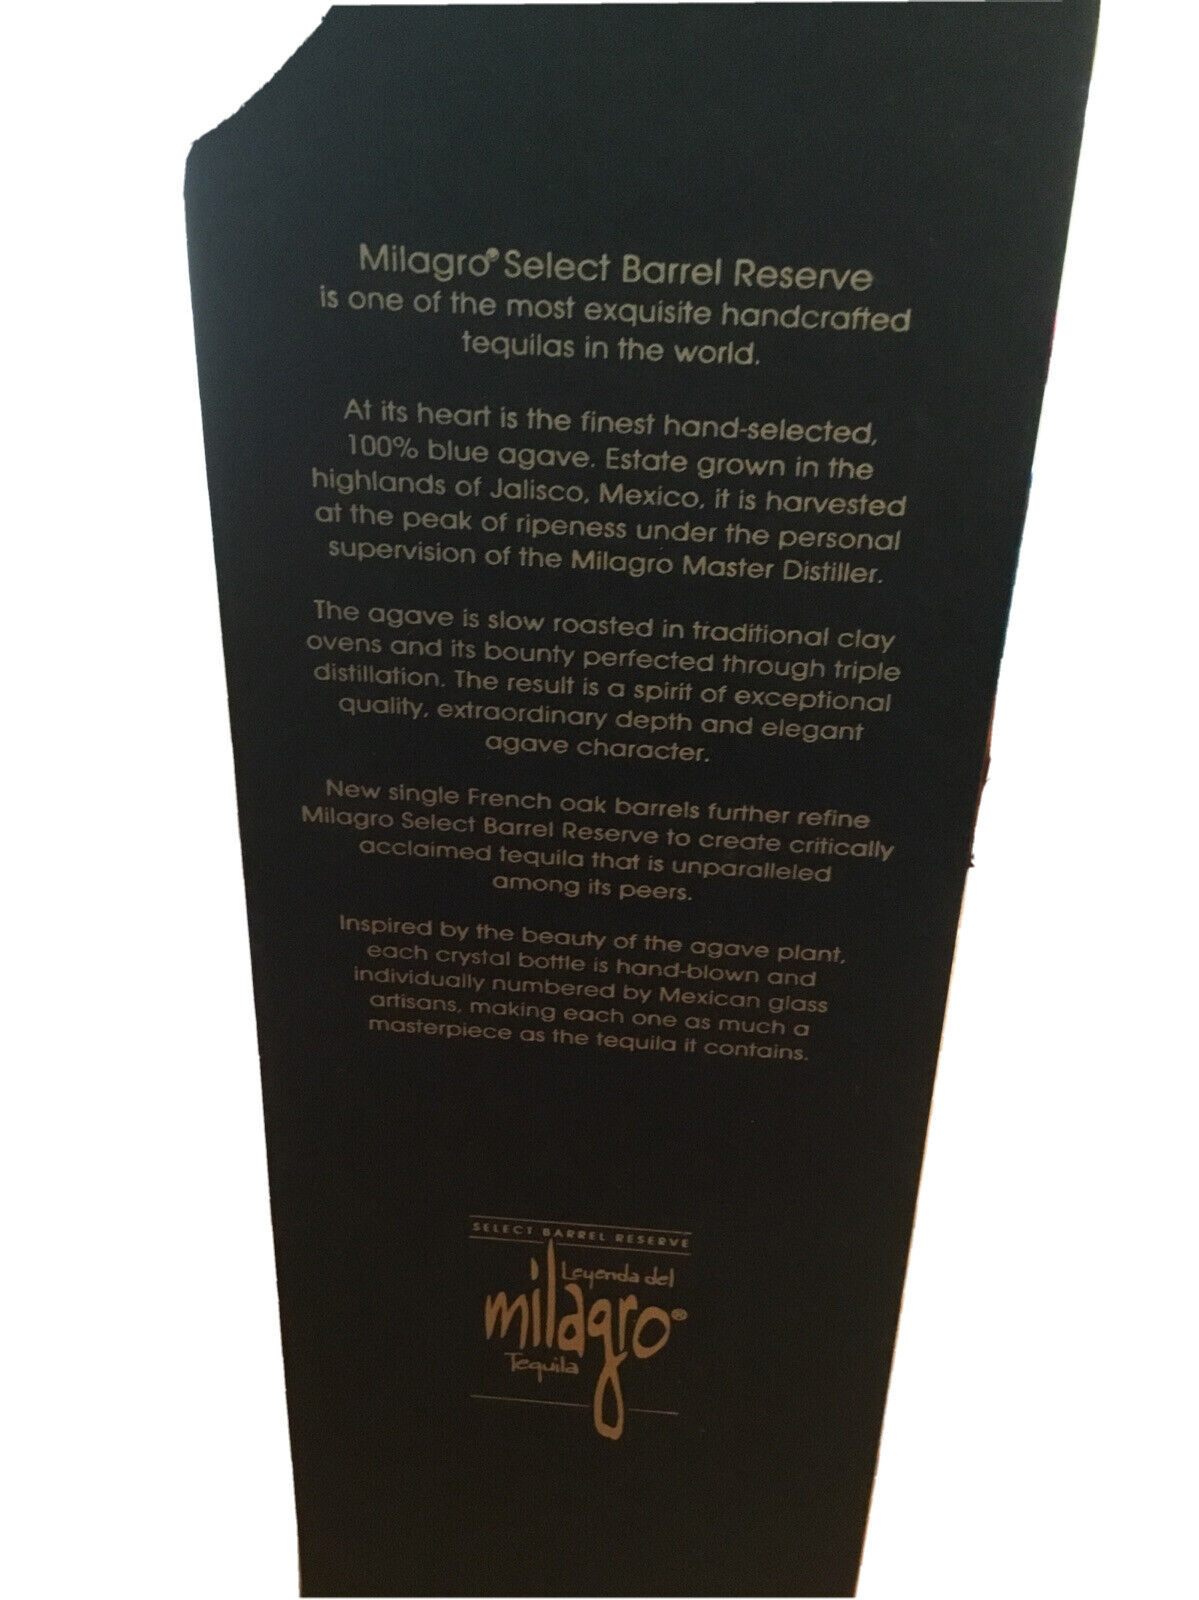 Milagro Select Barrel Reserve Limited Edition Tequila Bottle w/ Hand Blown Agave